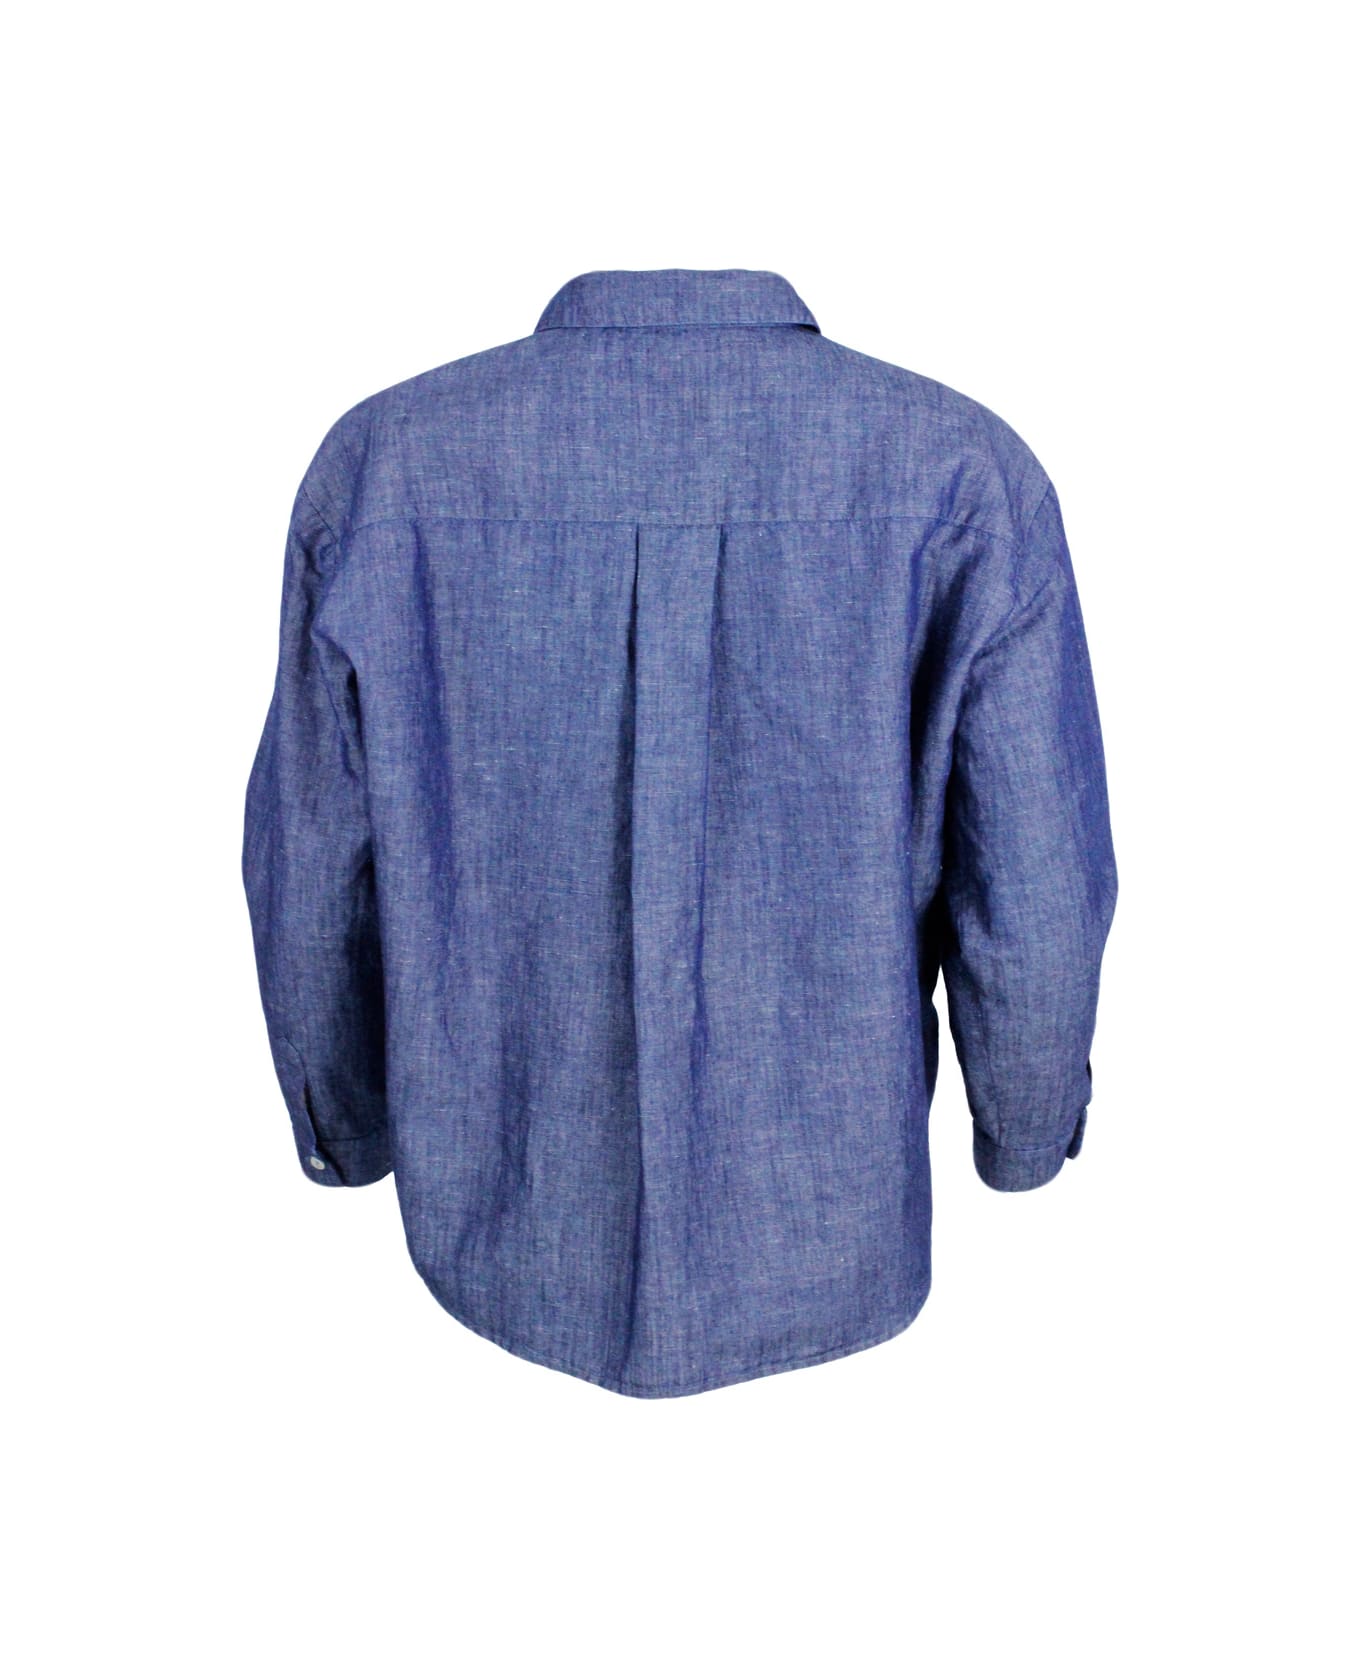 Barba Napoli Lightweight Denim-effect Pull-on Shirt In Linen Cotton With Four Buttons And Chest Pocket - Denim シャツ